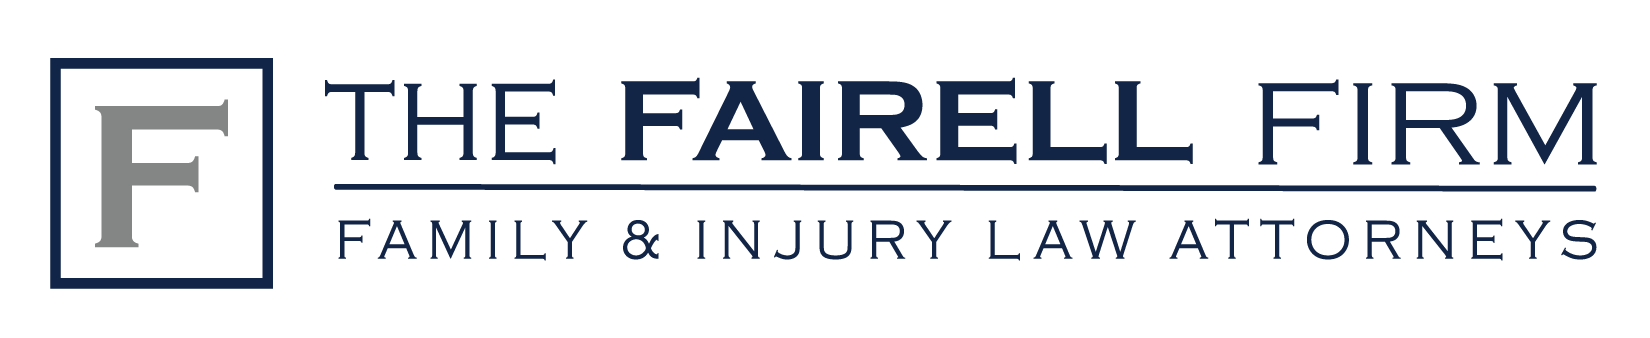 The Fairell Firm Family & Injury Law Attorneys Logo